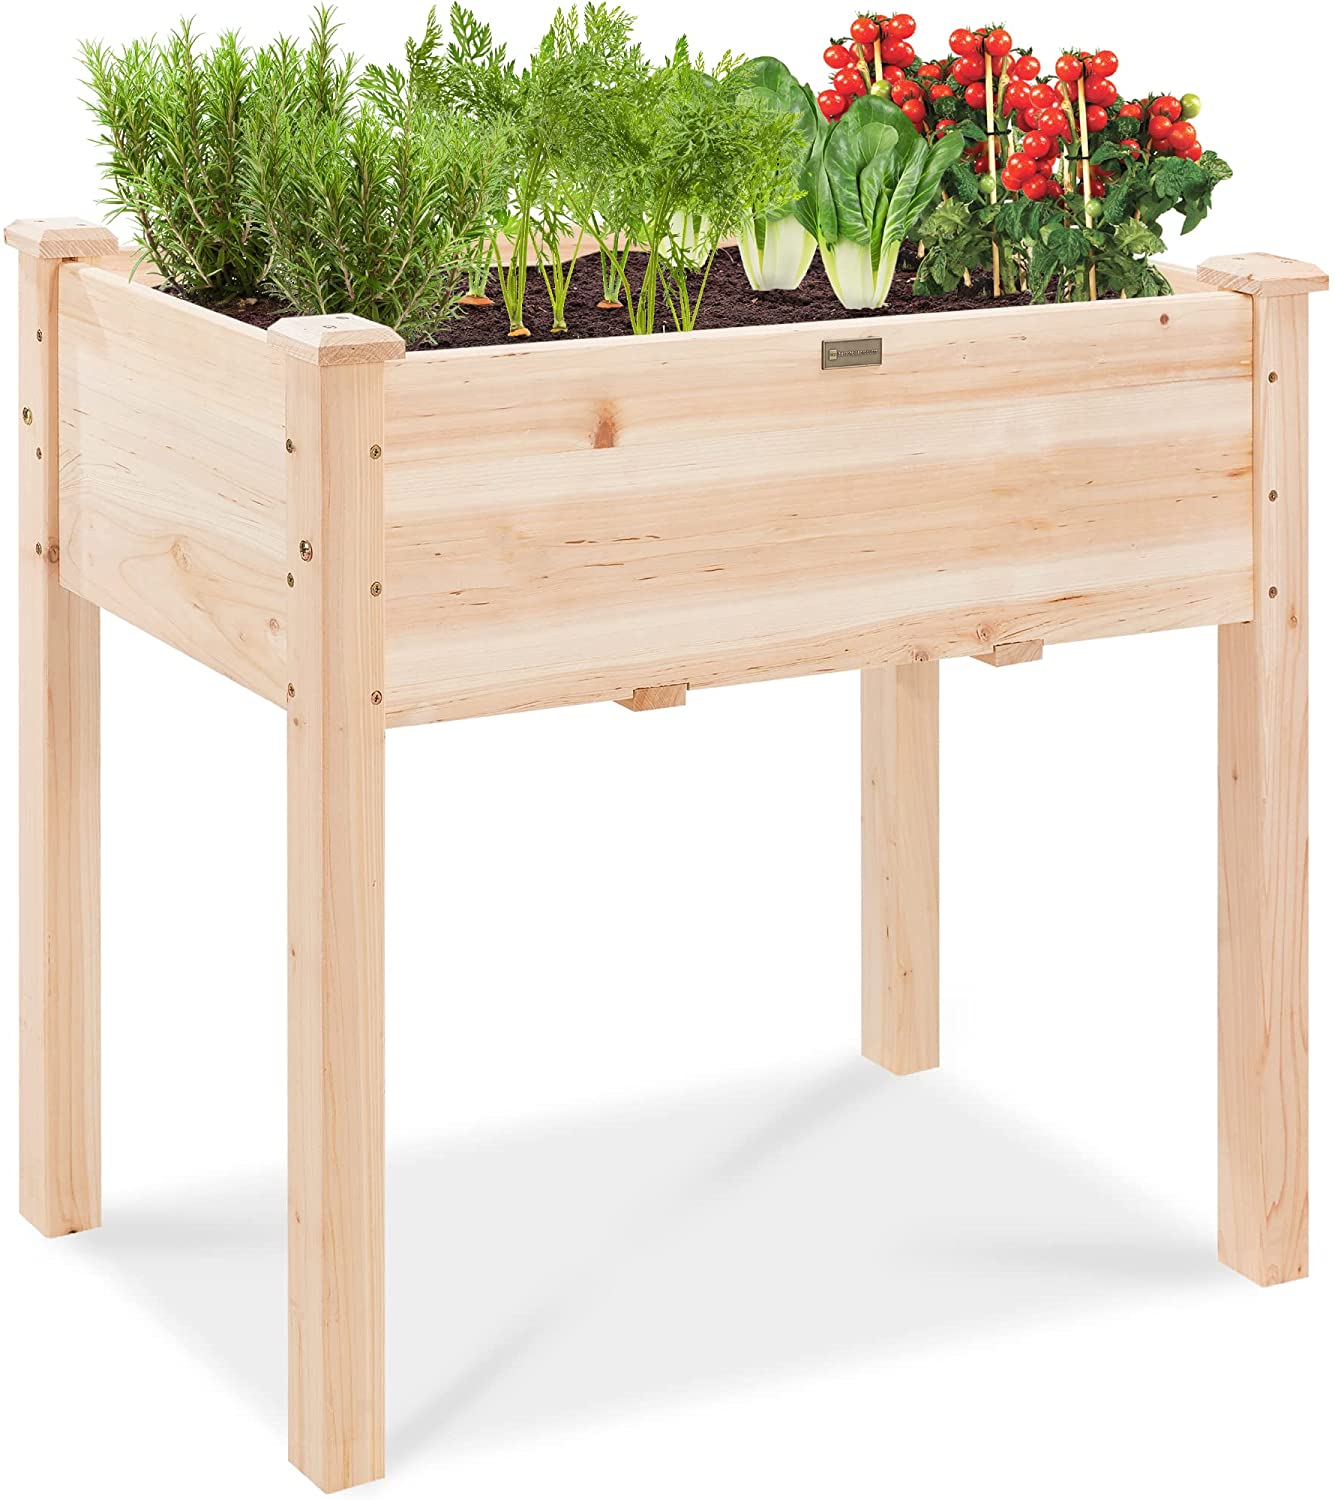 Extra Large Raised Garden Bed Elevated Pine Wood Planter Box Bed 30 Gal Capacity 